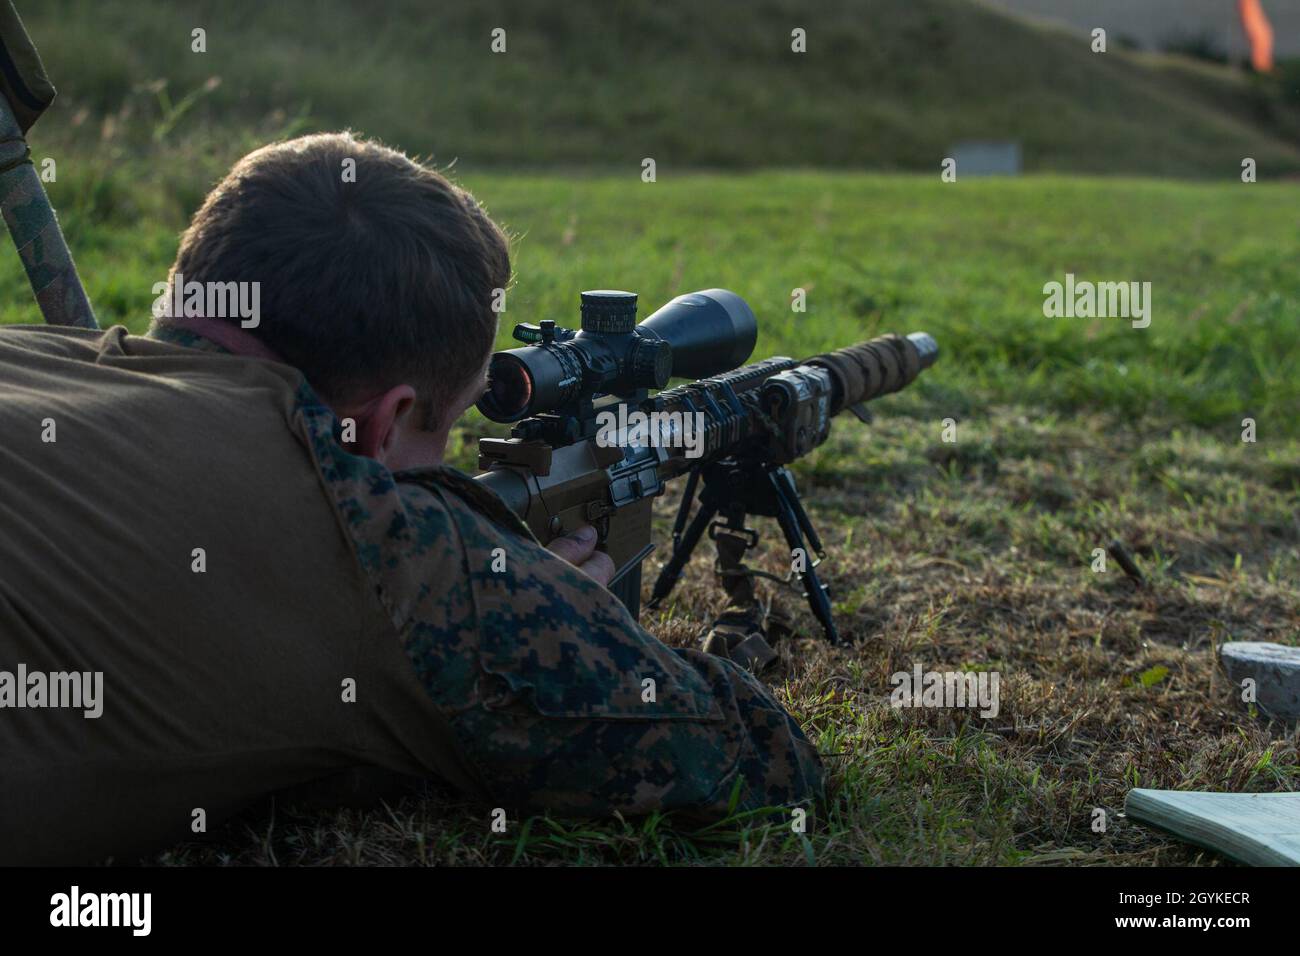 A Reconnaissance Marine with the 31st Marine Expeditionary Unit’s Maritime Raid Force sights in during a live-fire sniper exercise at Puuloa Rifle Range, Hawaii, Jan. 17, 2020 The 31st MEU, the Marine Corps’ only continuously forward-deployed MEU, provides a flexible and lethal force ready to perform a wide range of military operations as the premier crisis response force in the Indo-Pacific region. (Official U.S. Marine Corps photo by Cpl. Isaac Cantrell) Stock Photo